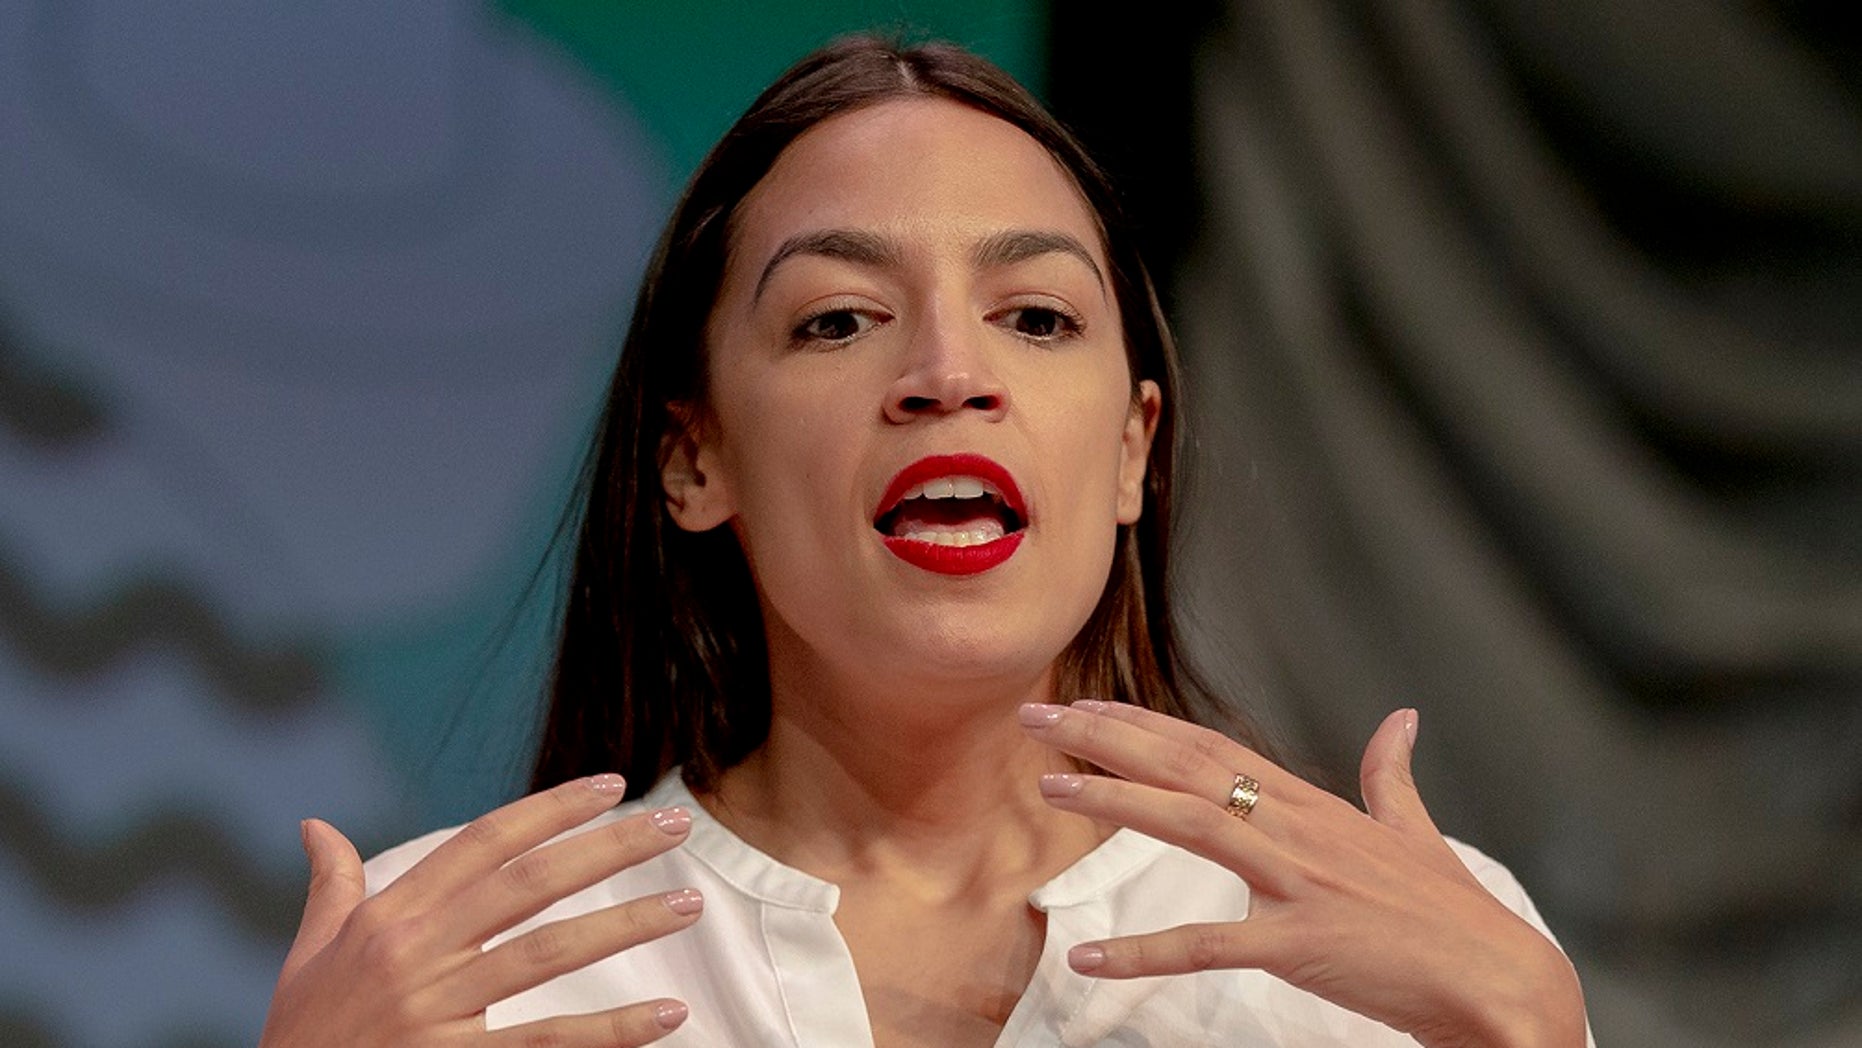 Rep. Alexandria Ocasio-Cortez, D-New York, speaks during South by Southwest on Saturday, March 9, 2019, in Austin, Texas. (Nick Wagner/Austin American-Statesman via AP)